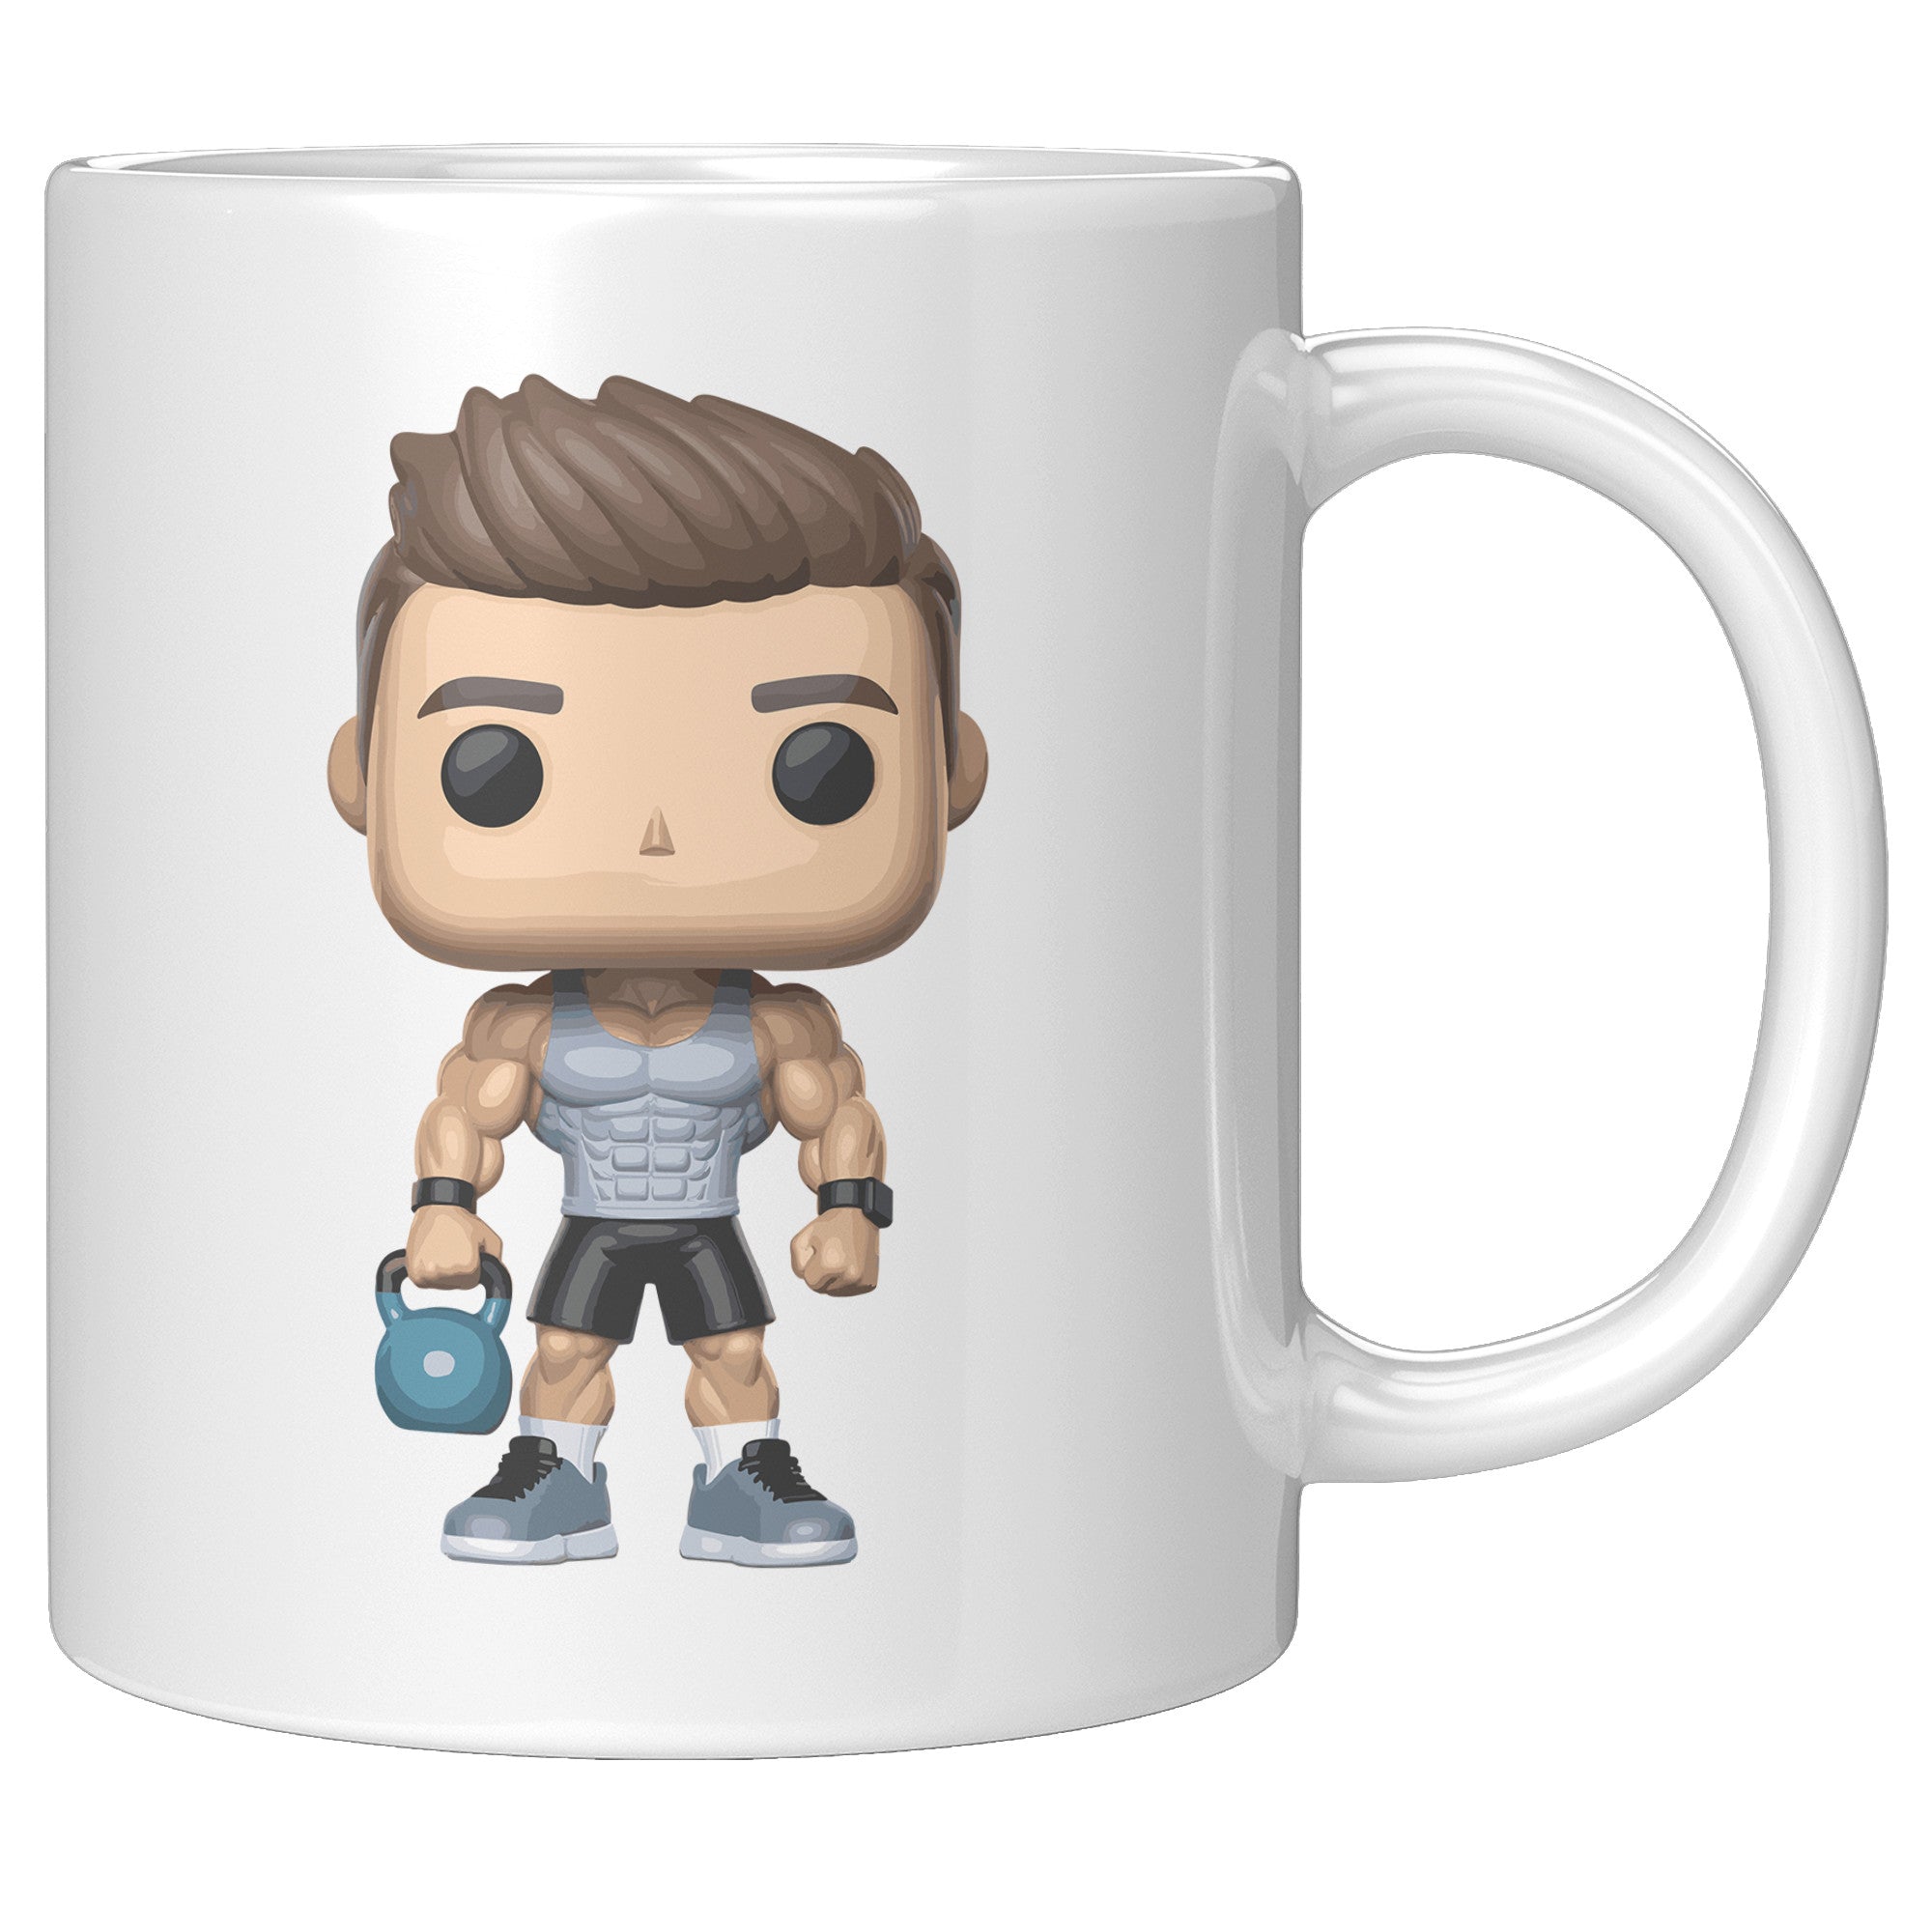 "CrossFit Funko Pop Style Mug - Male Fitness Enthusiast Coffee Cup - Unique Gift for Gym Buffs - Fun Workout-Inspired Drinkware"